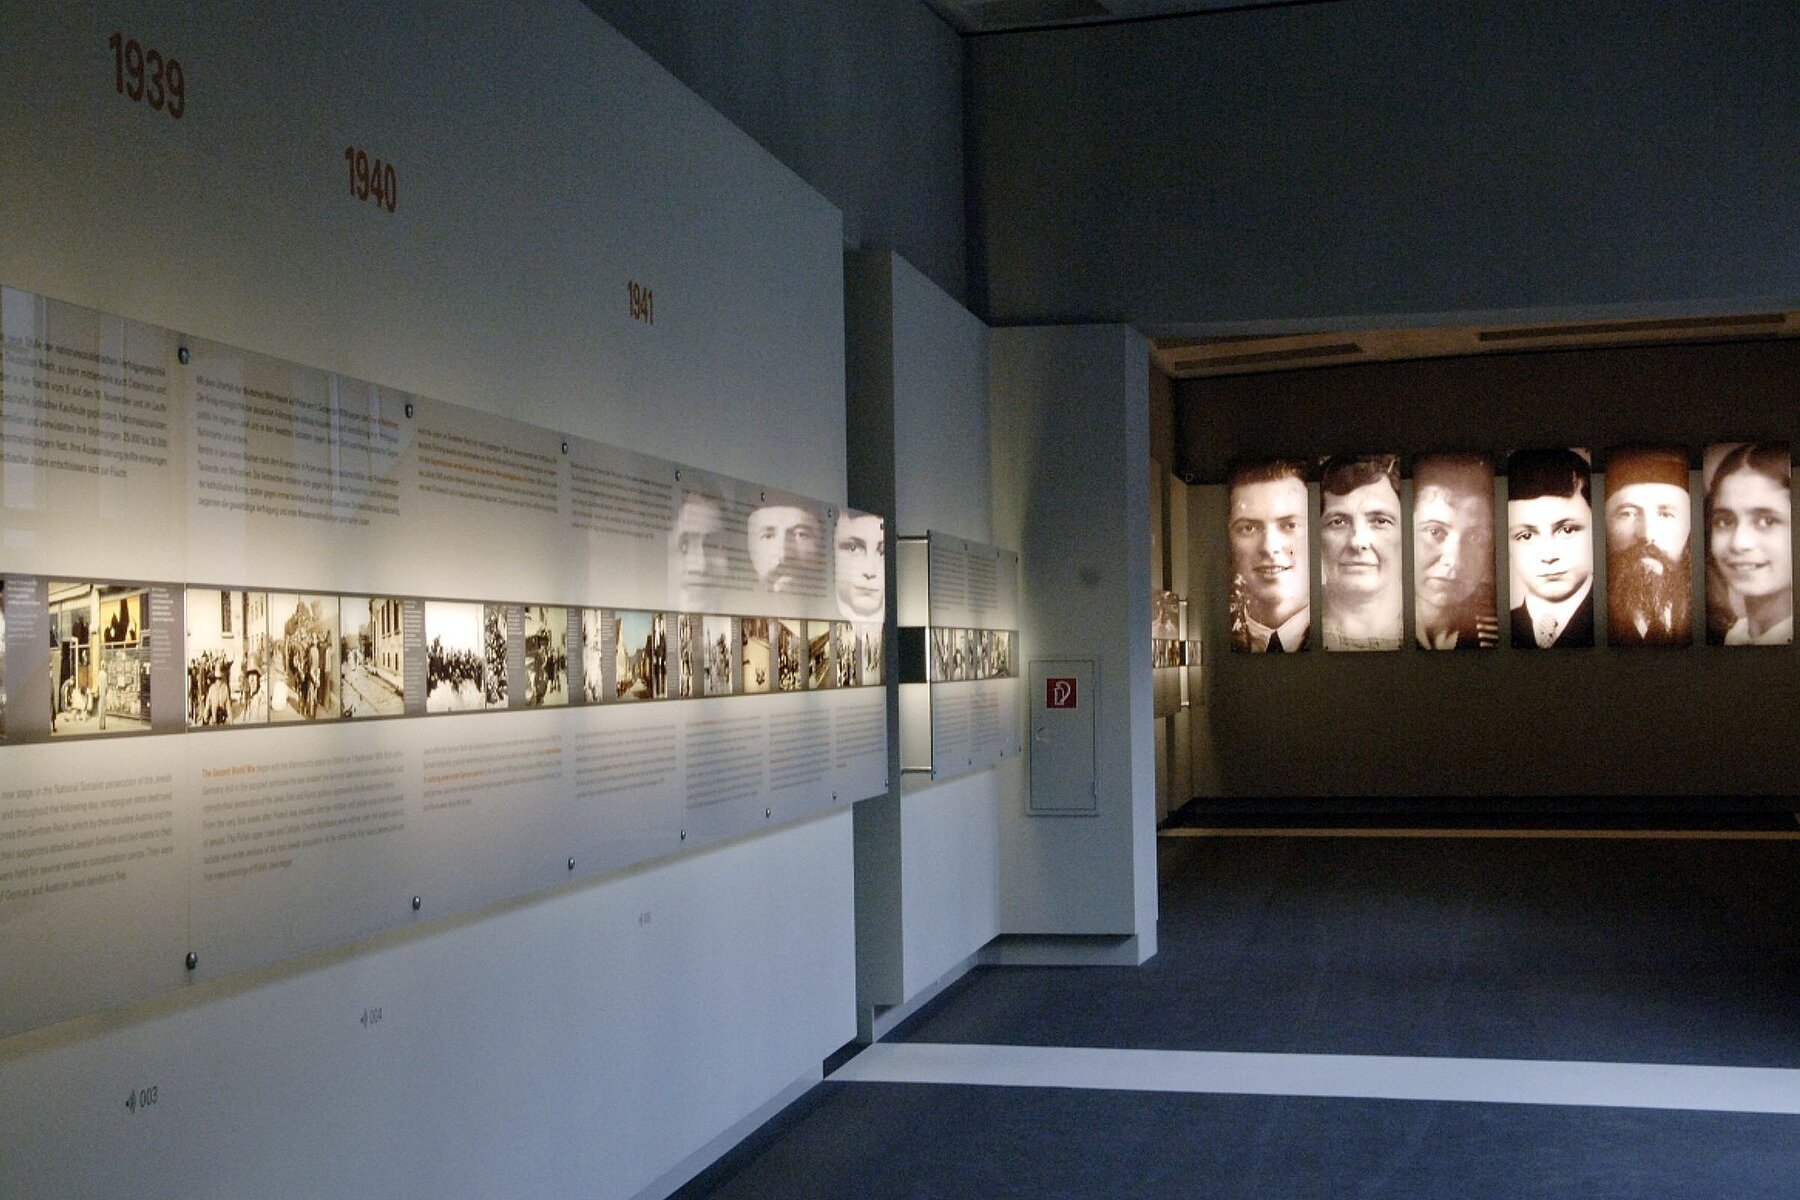 Walls in the underground Information Center with large portraits, small pictures and texts.